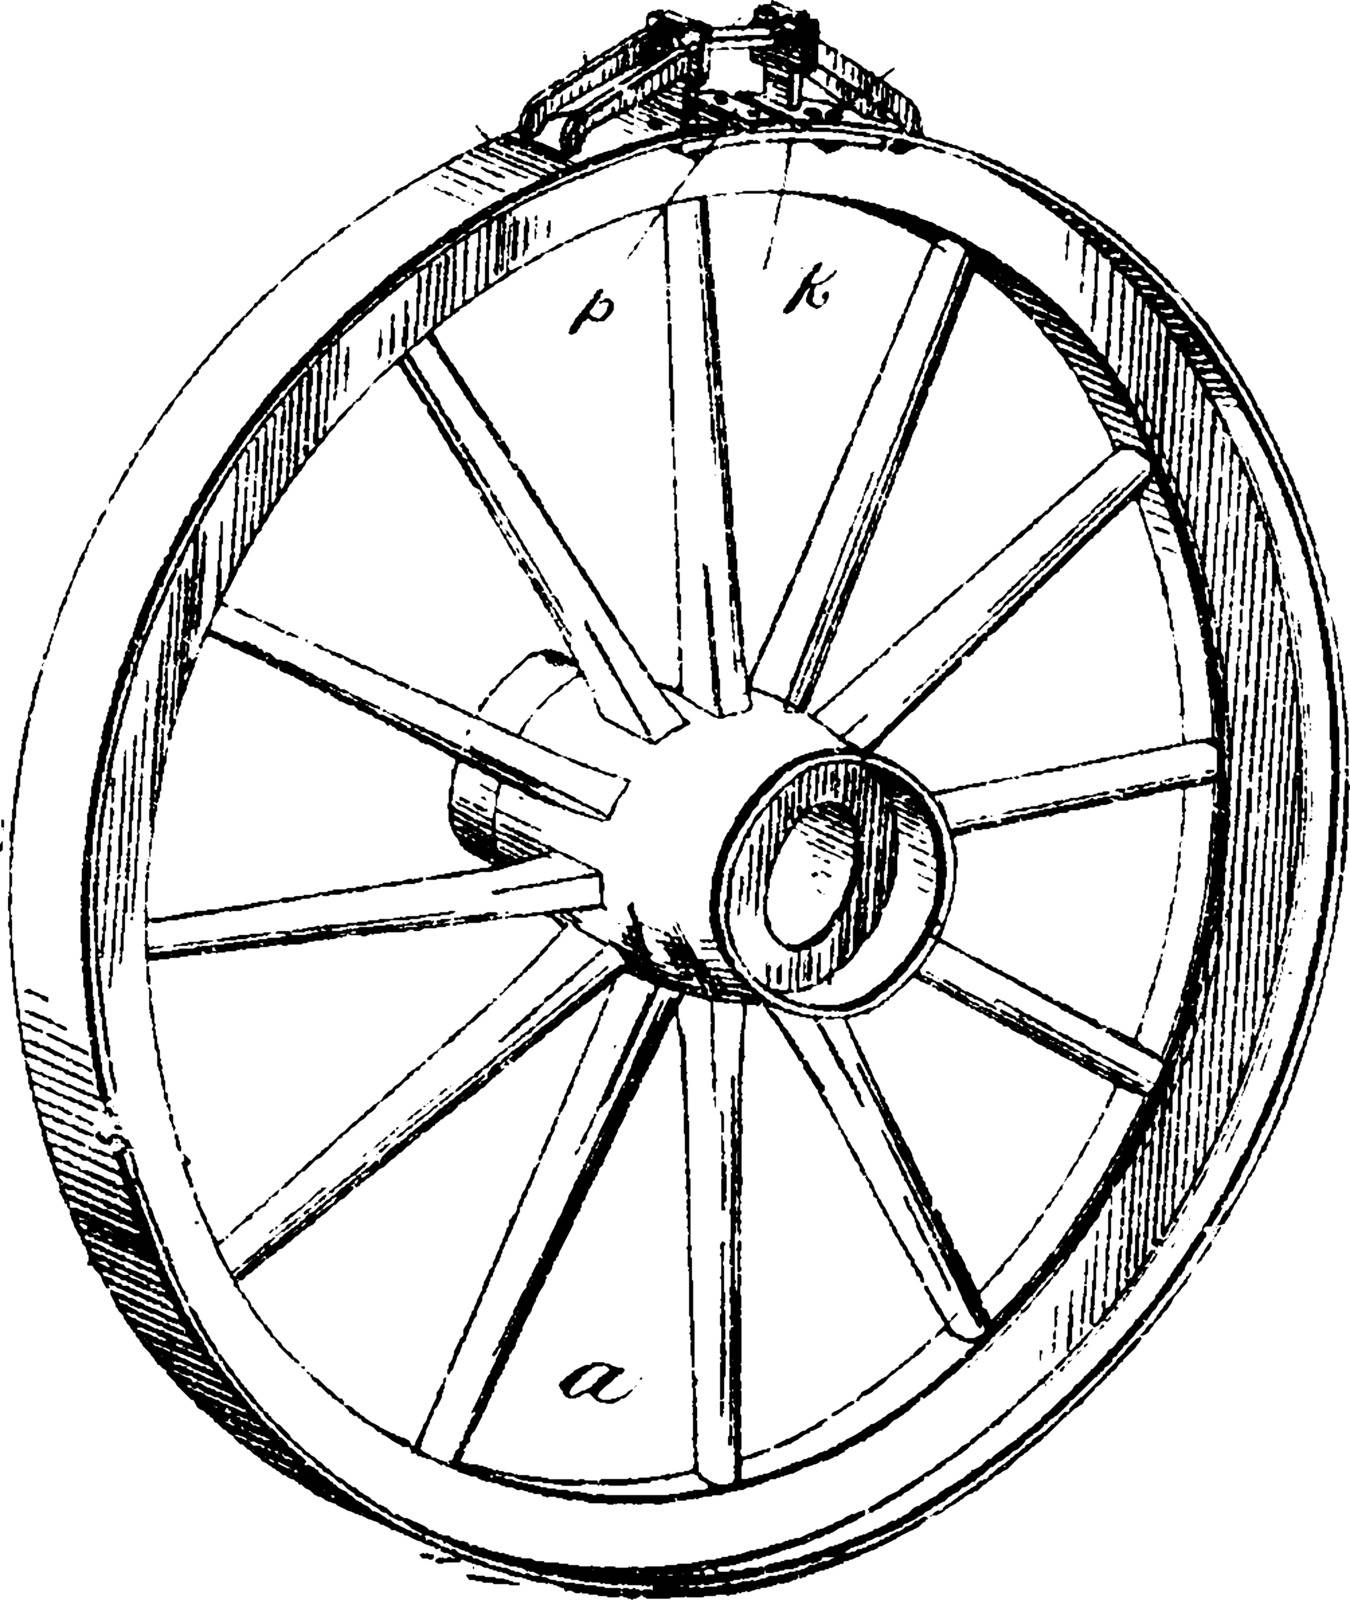 Adjustable Tire is ring shaped the earliest tires were bands of iron placed on wooden wheels which were used on carts and wagons, vintage line drawing or engraving illustration.